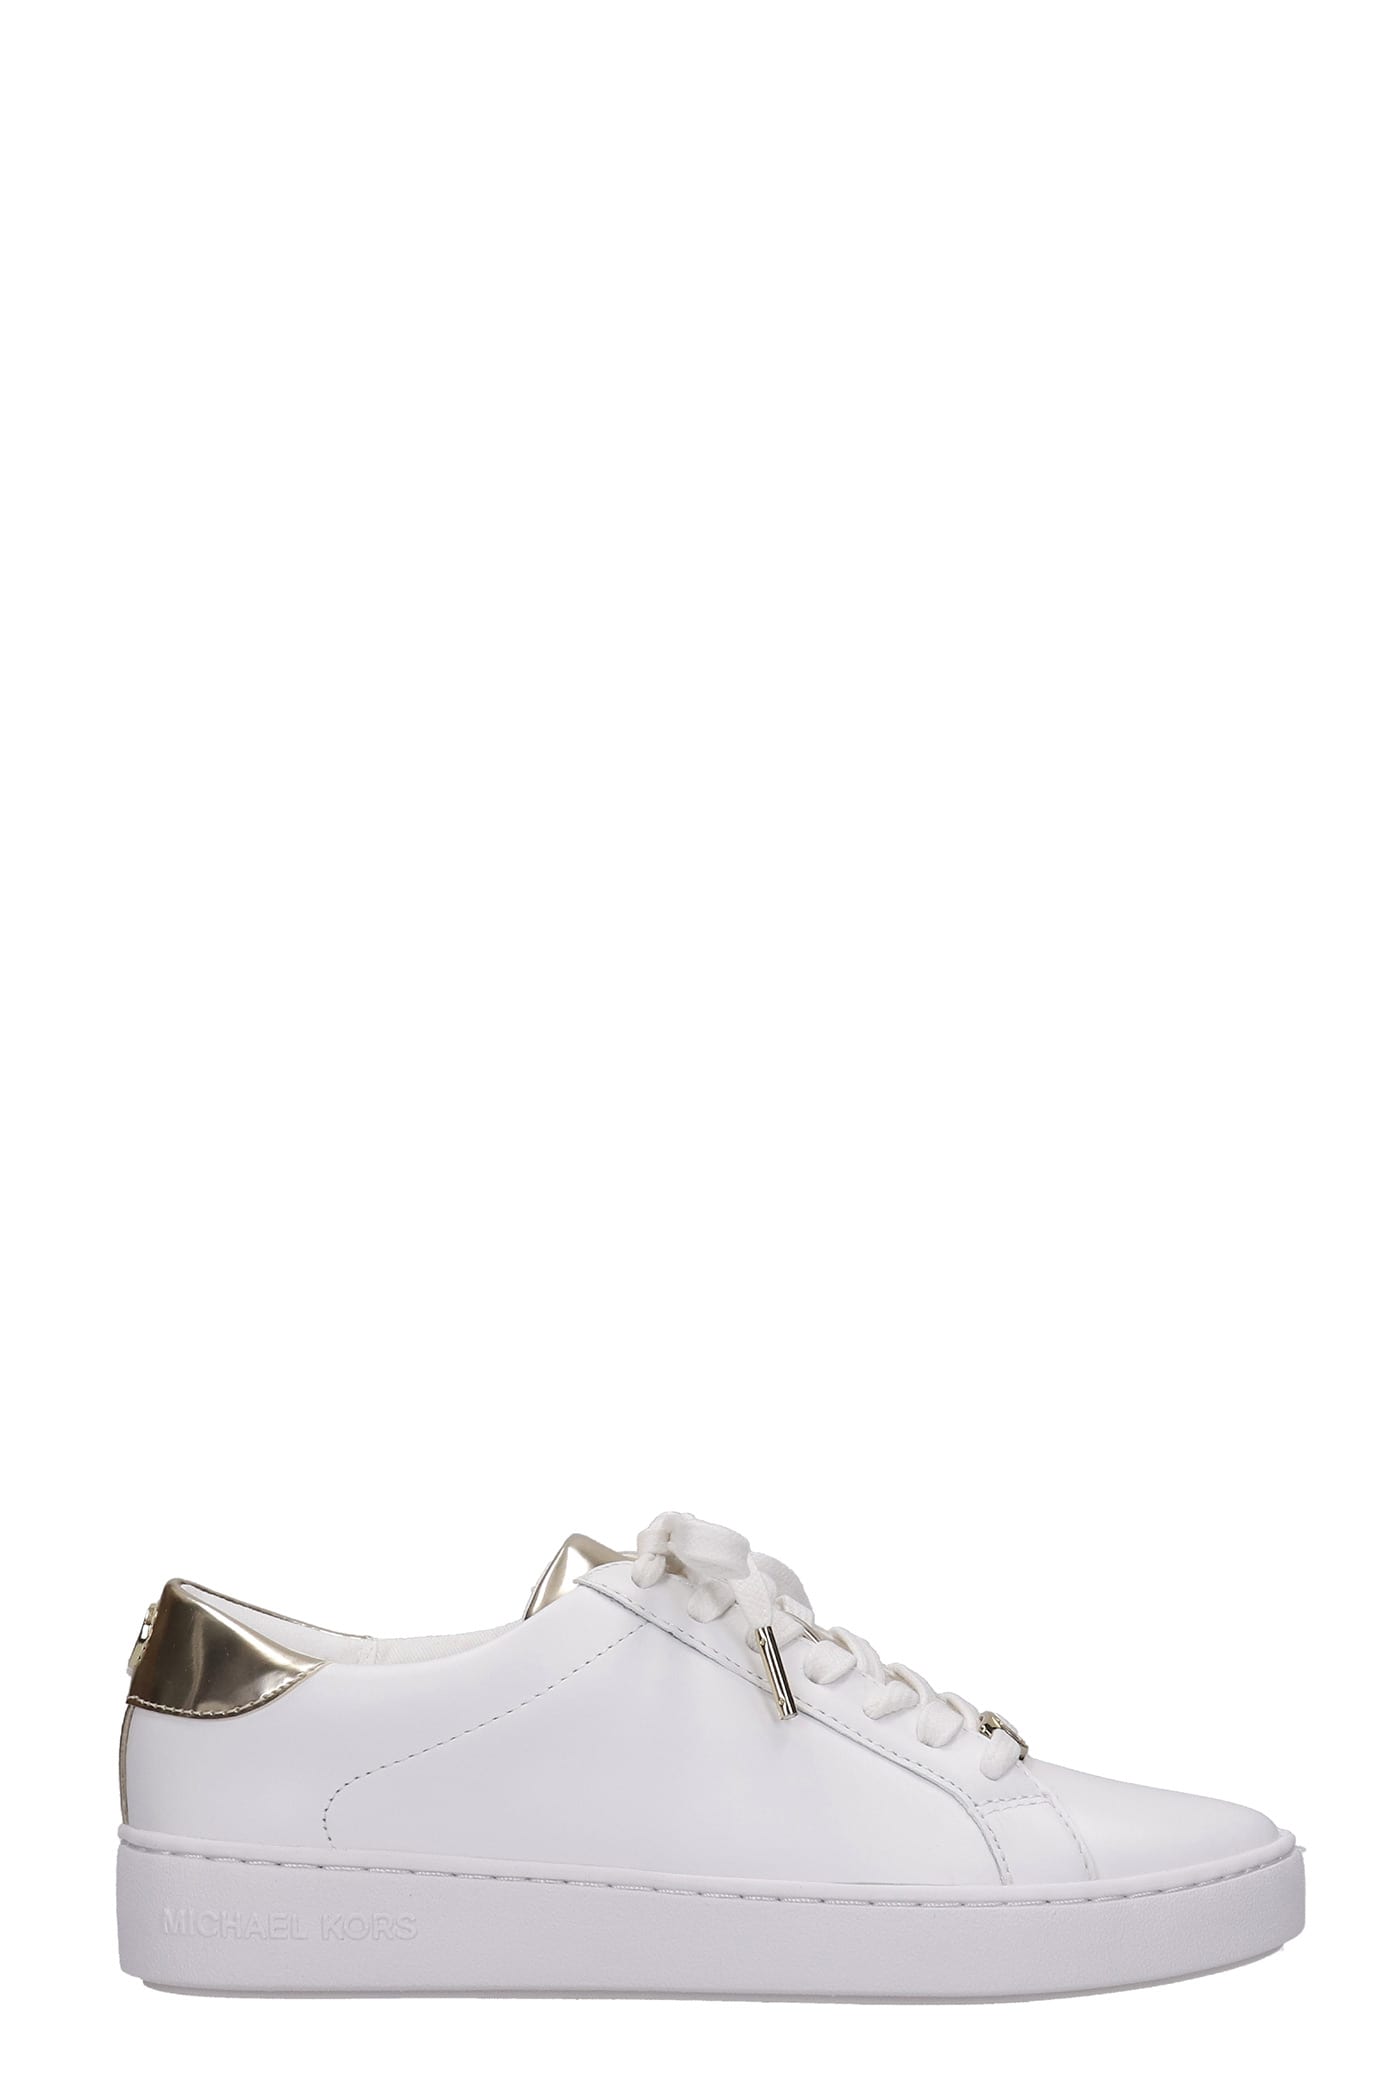 Michael Kors Irving Sneakers In White Leather